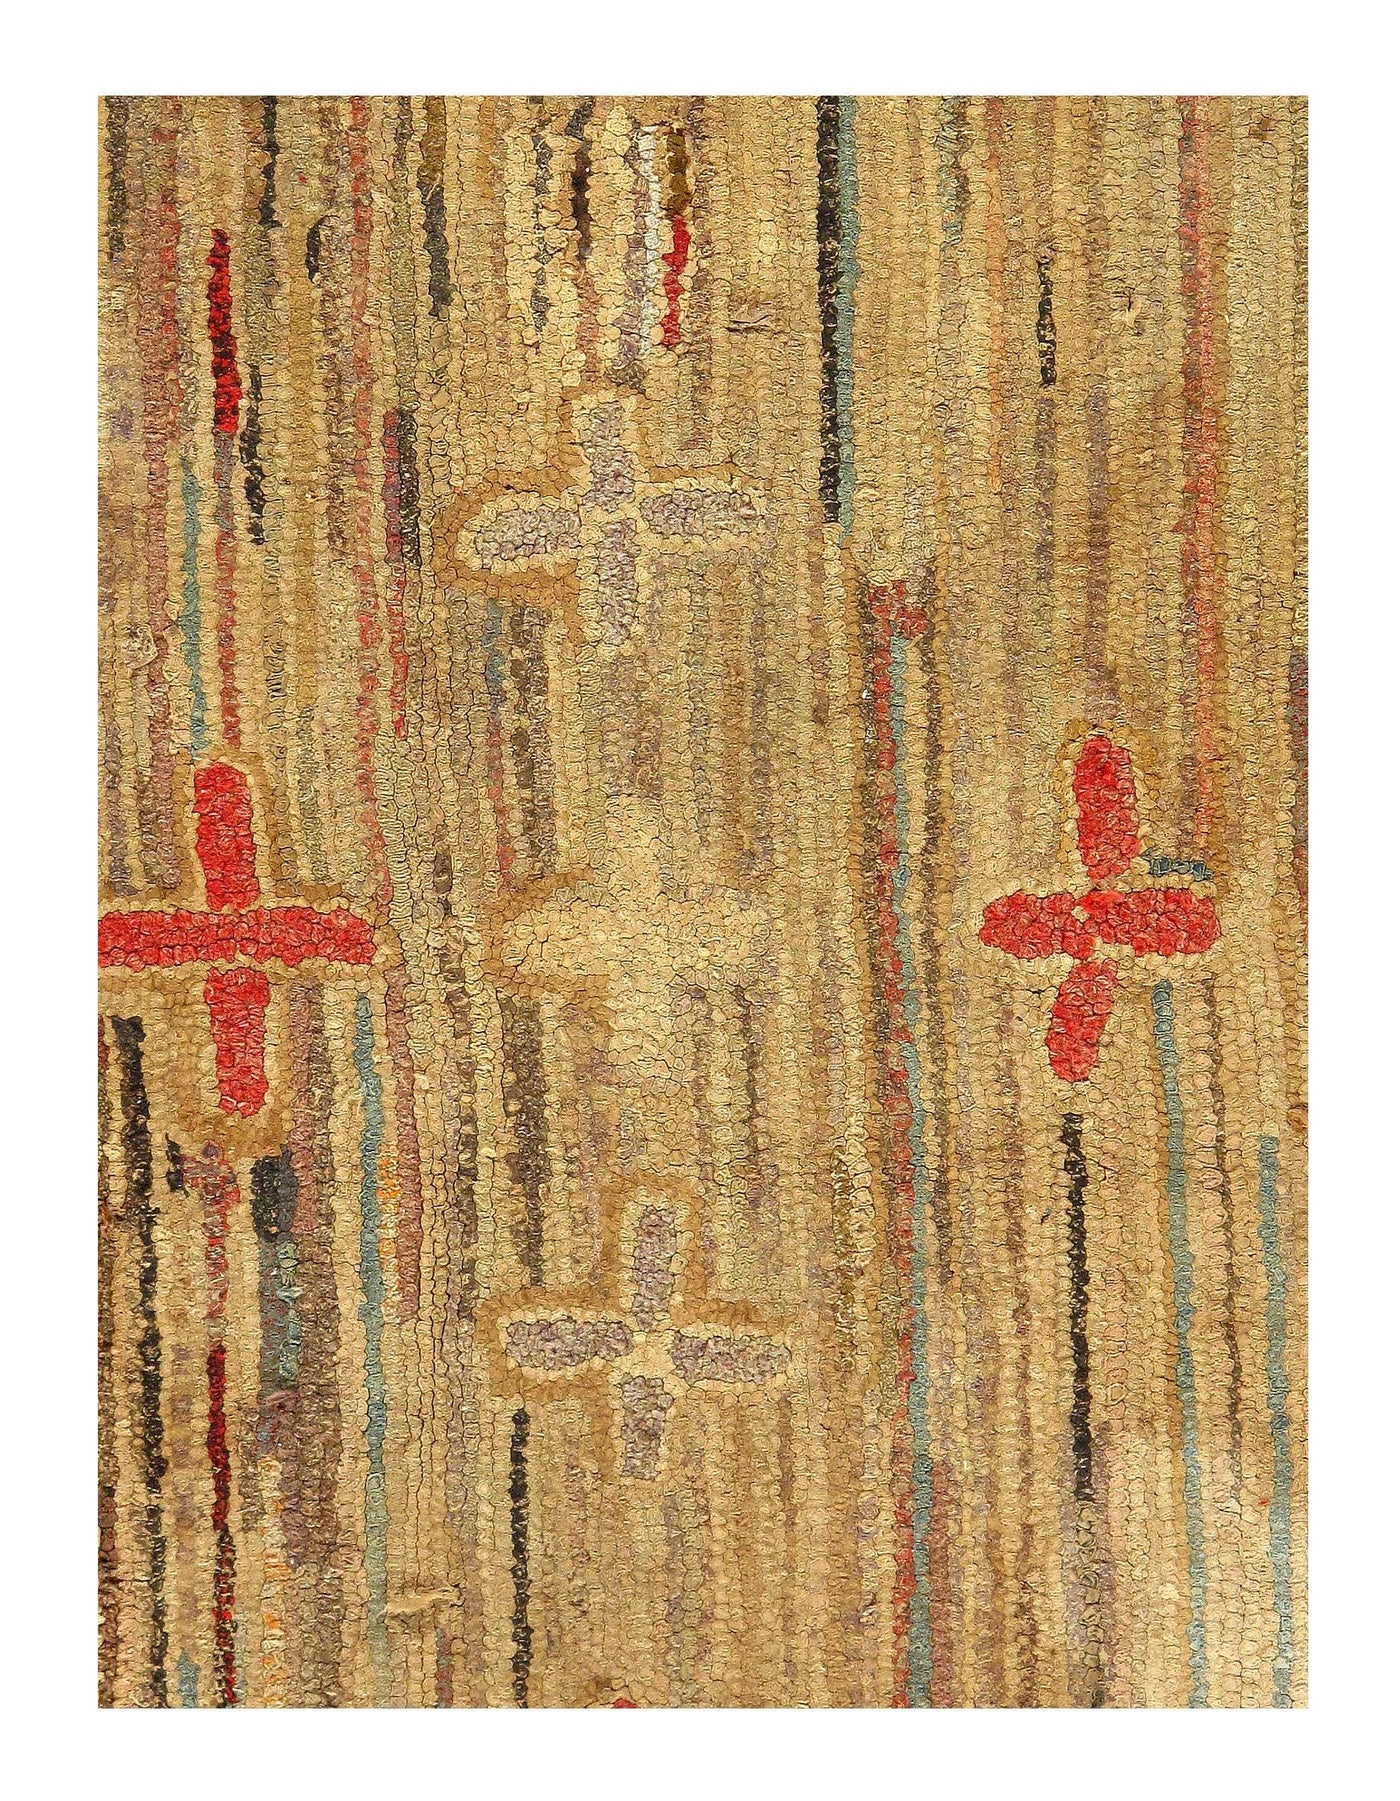 Small Size Antique American Hooked Rug - 3'2'' X 6'11''